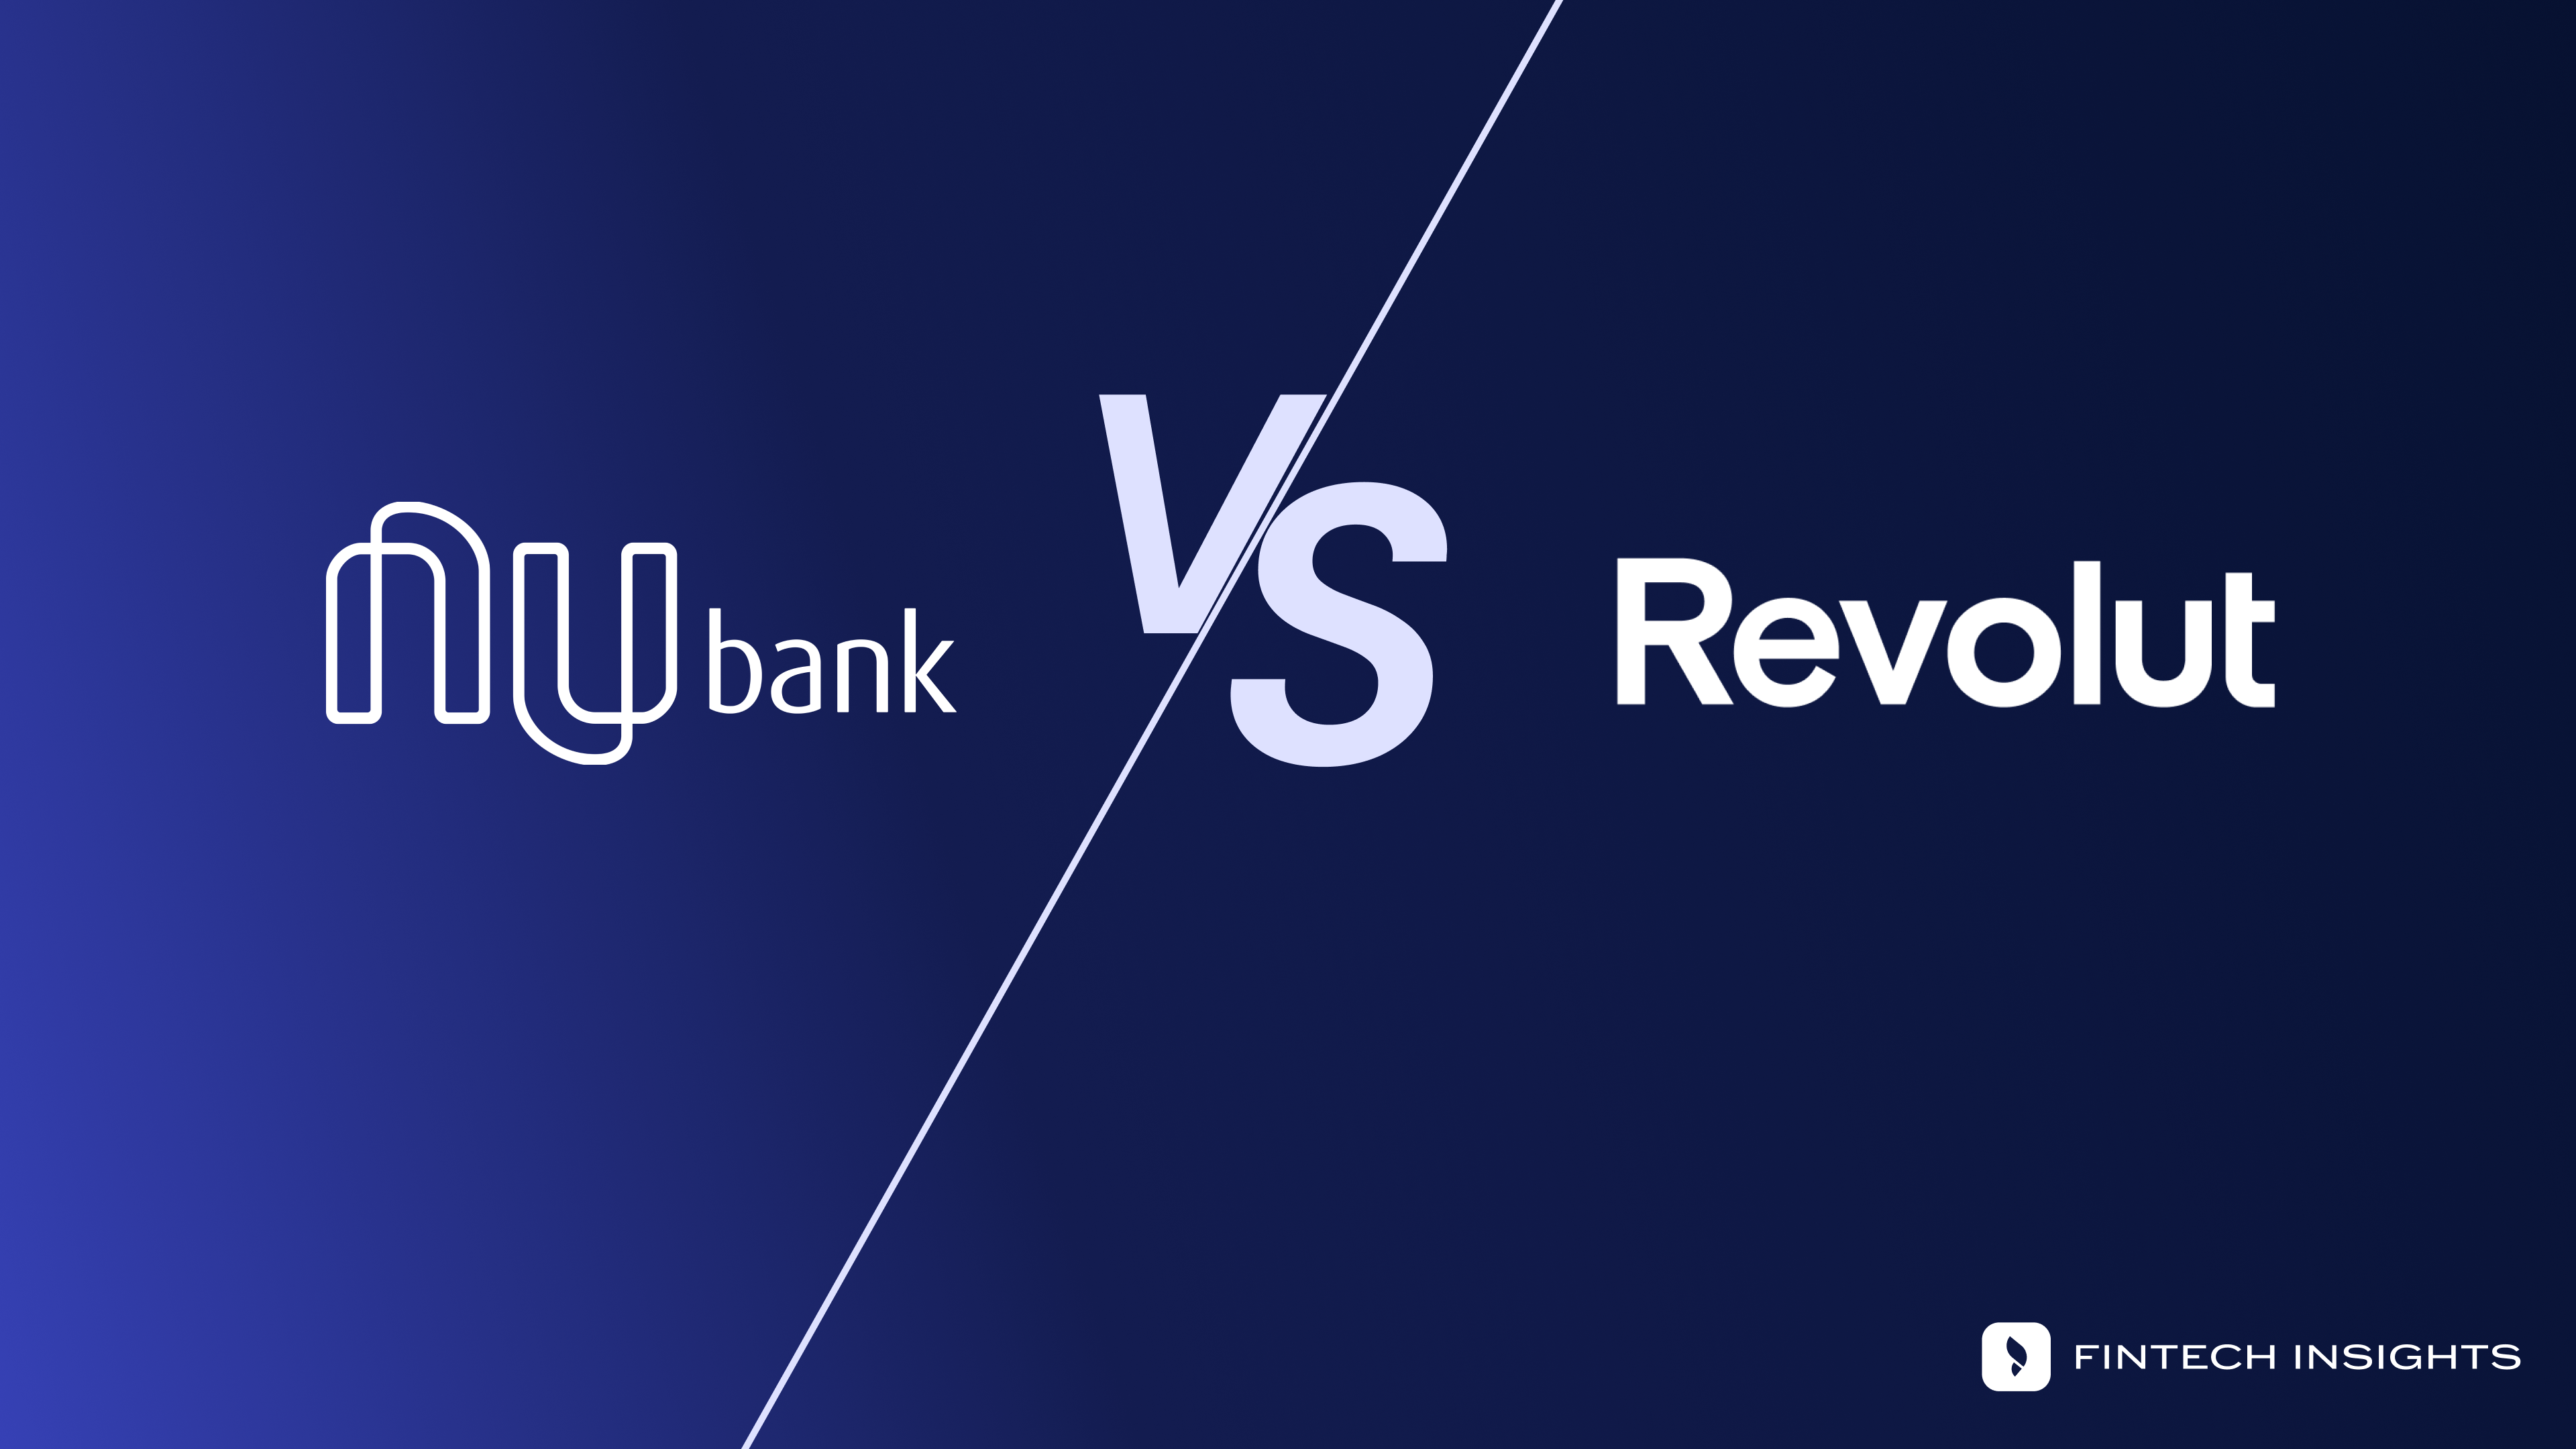 Nubank vs Revolut: Who will come out on top in Brazil?